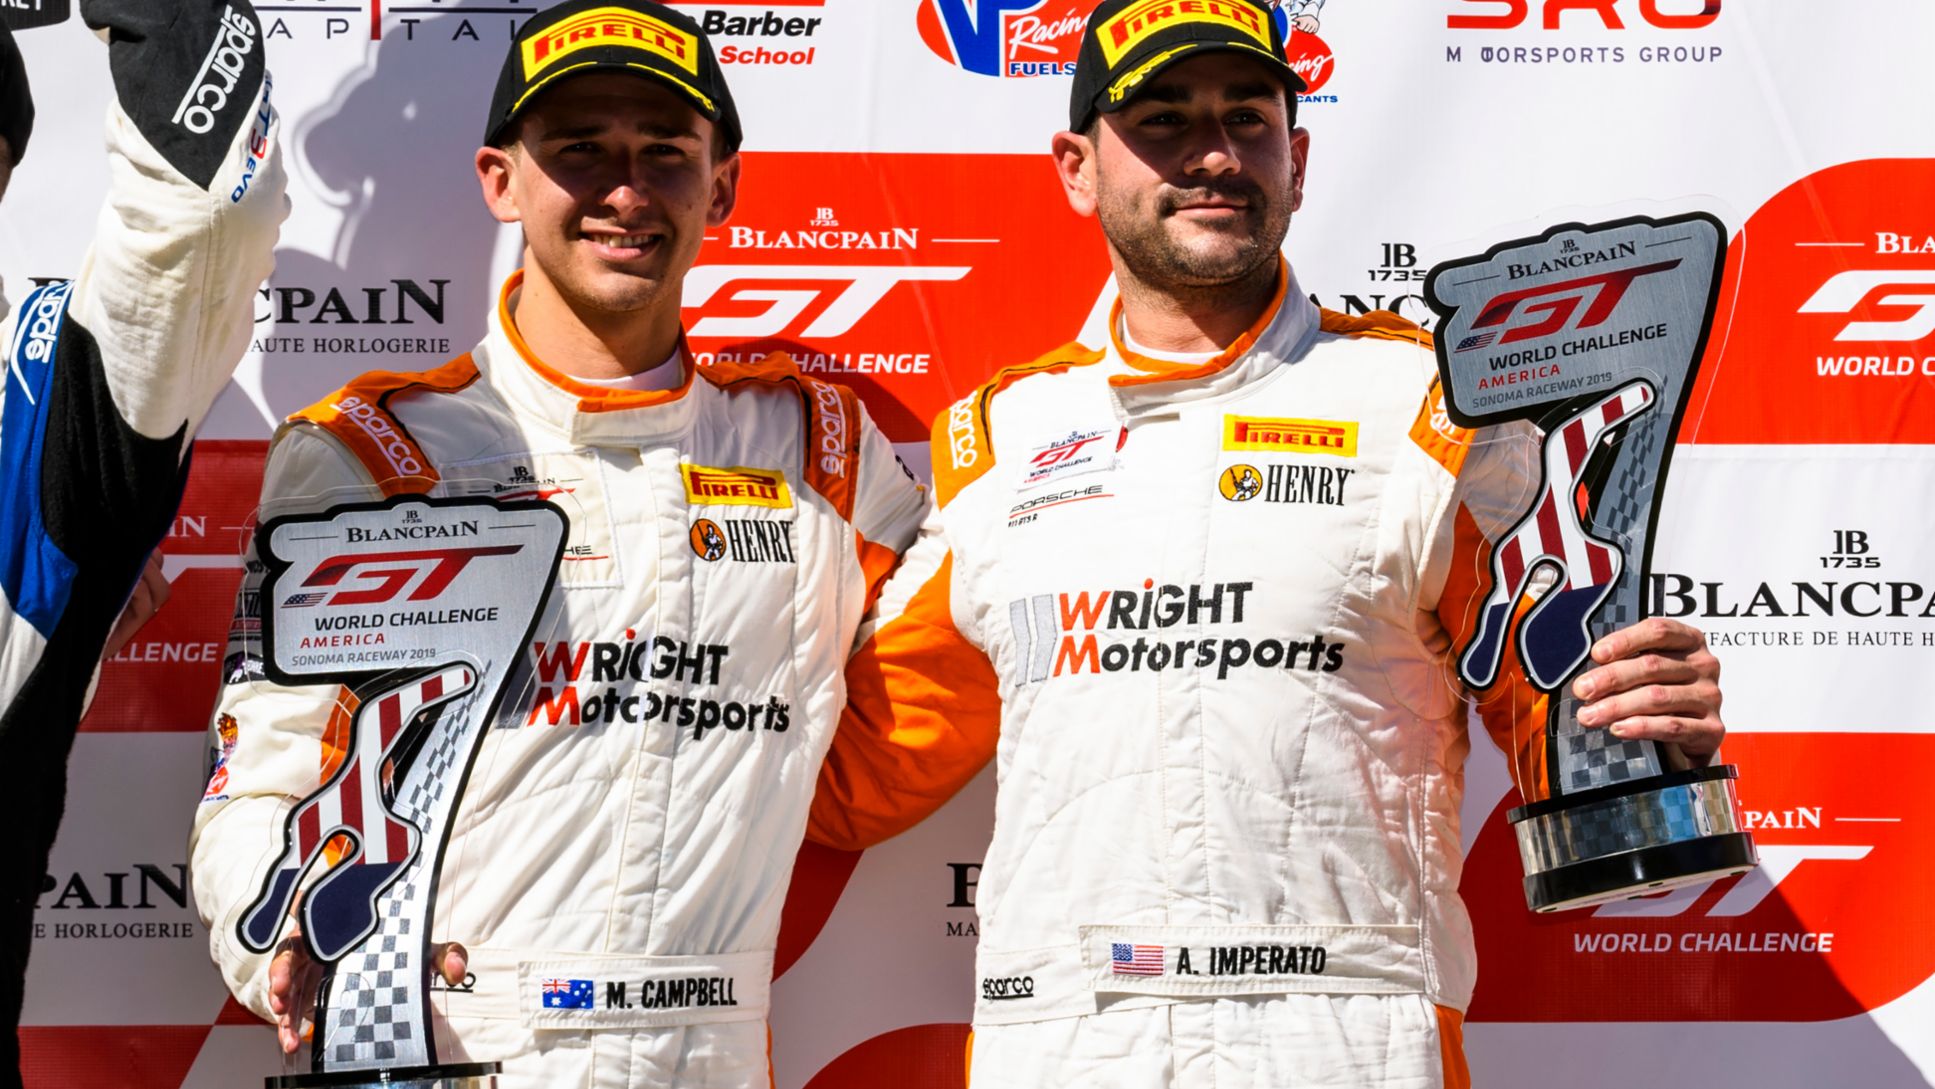 Matt Campbell and Anthony Imperato celebrate Wright second-place in Race 1 SRO GT World Challenge America at Sonoma